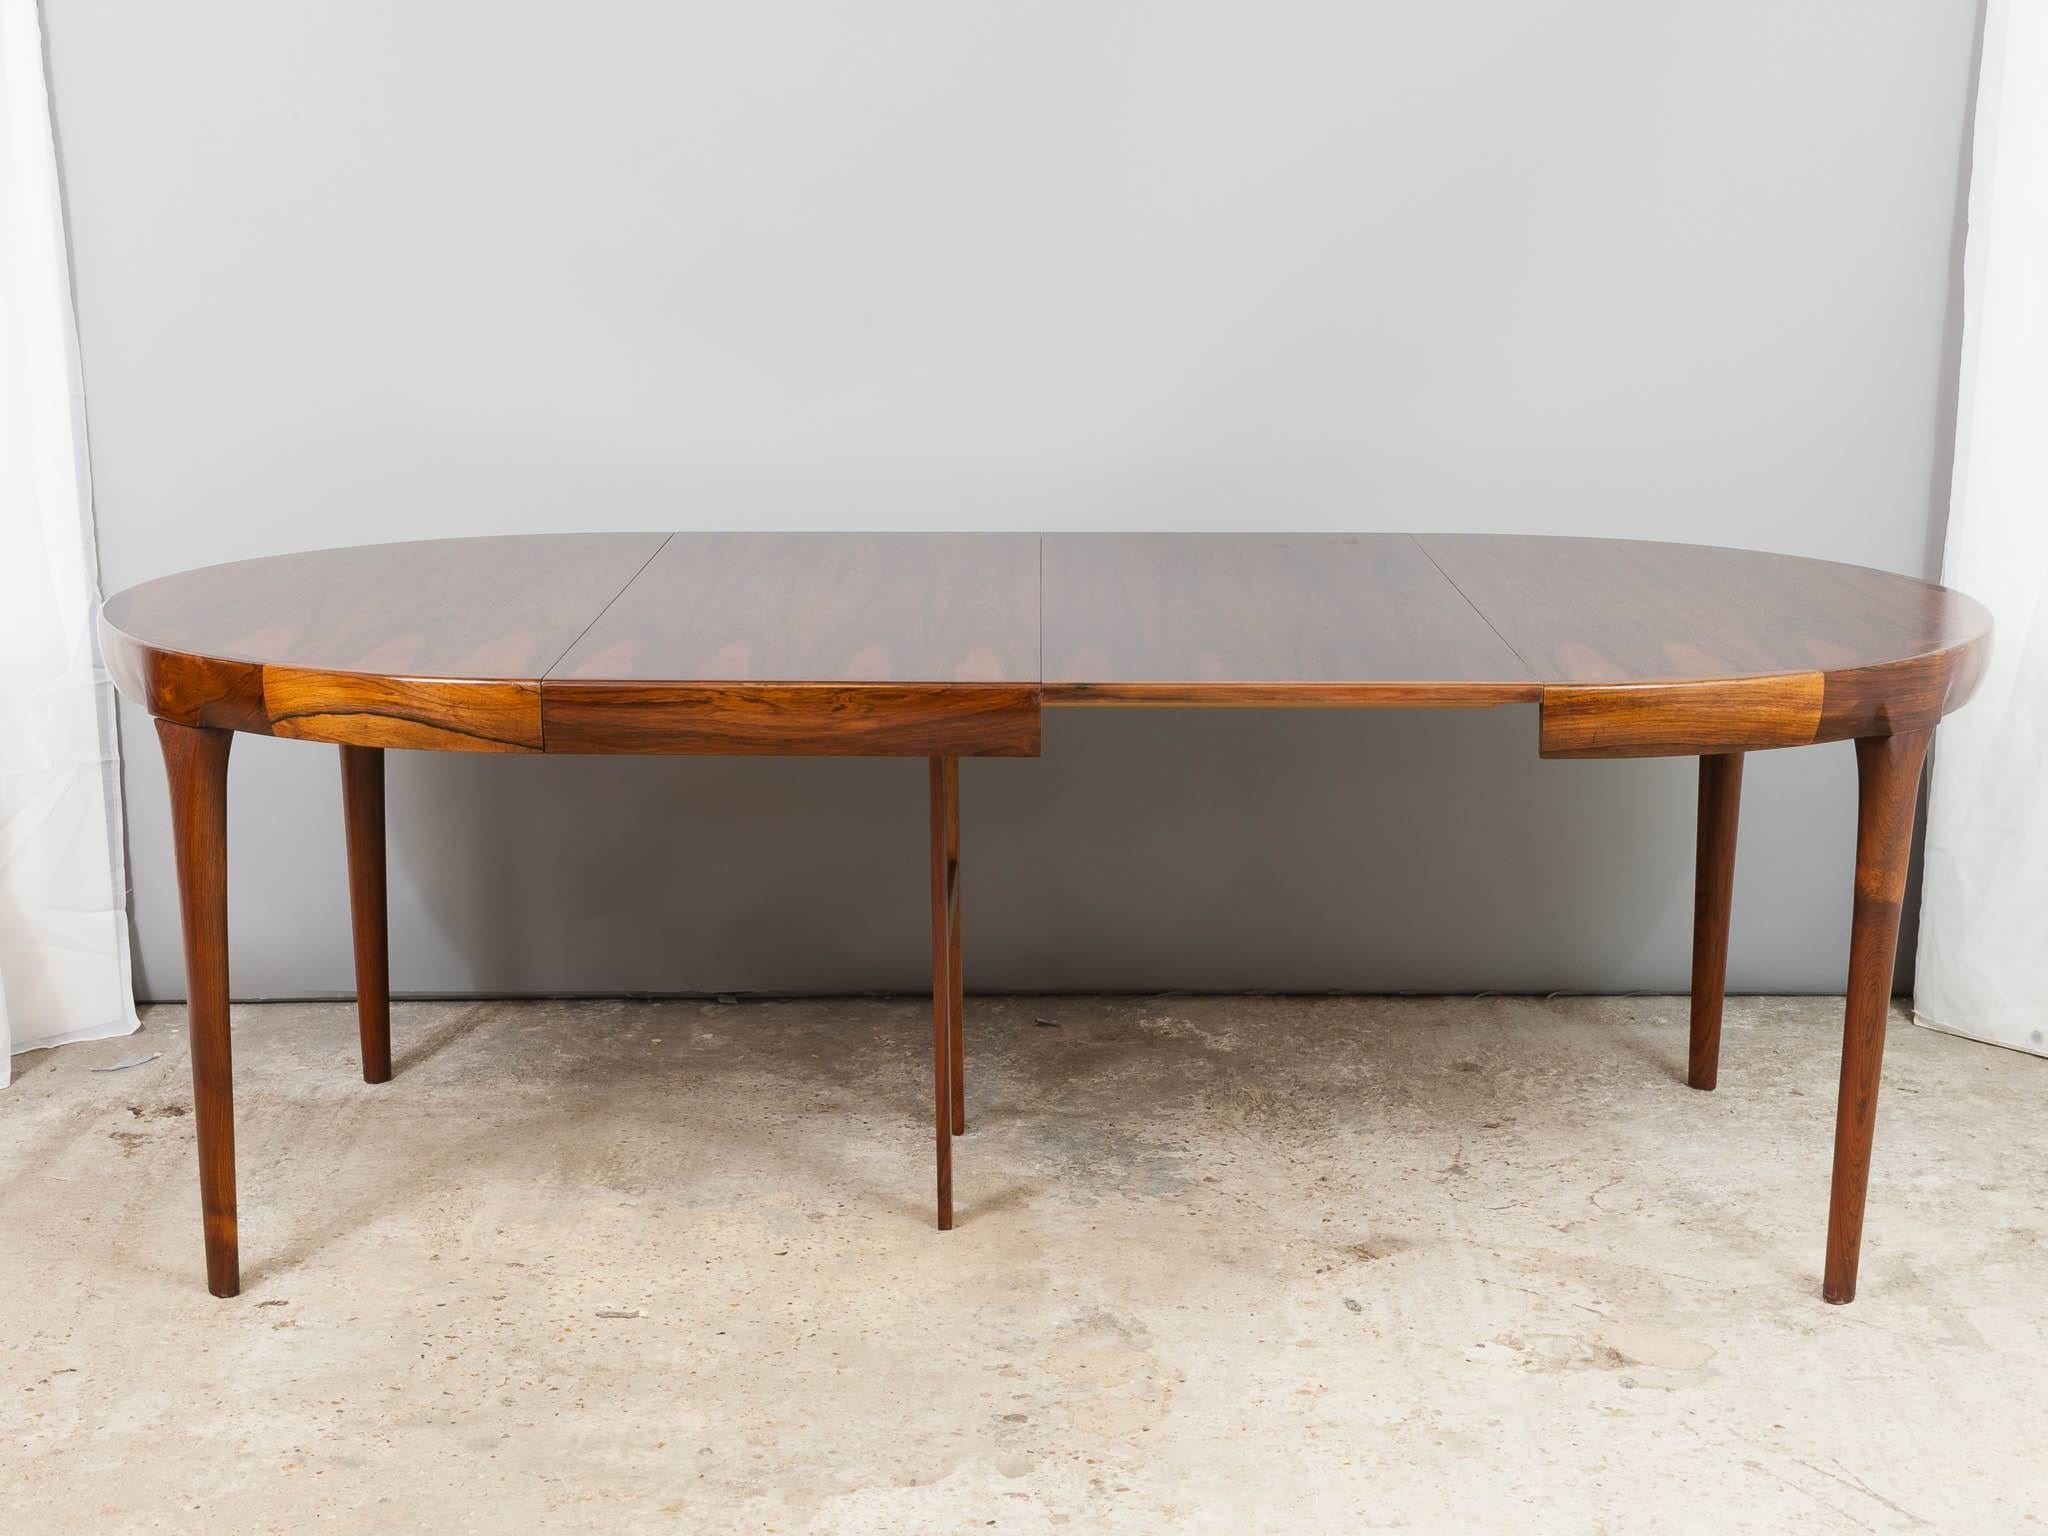 Mid-century Danish Rosewood extending dining table designed by Ib Kofod Larsen for Faarup Møbelfabrik. The table has been beautifully and painstakingly restored highlighting the wonderful deep grain, sleek sculptured lines, and tapered solid